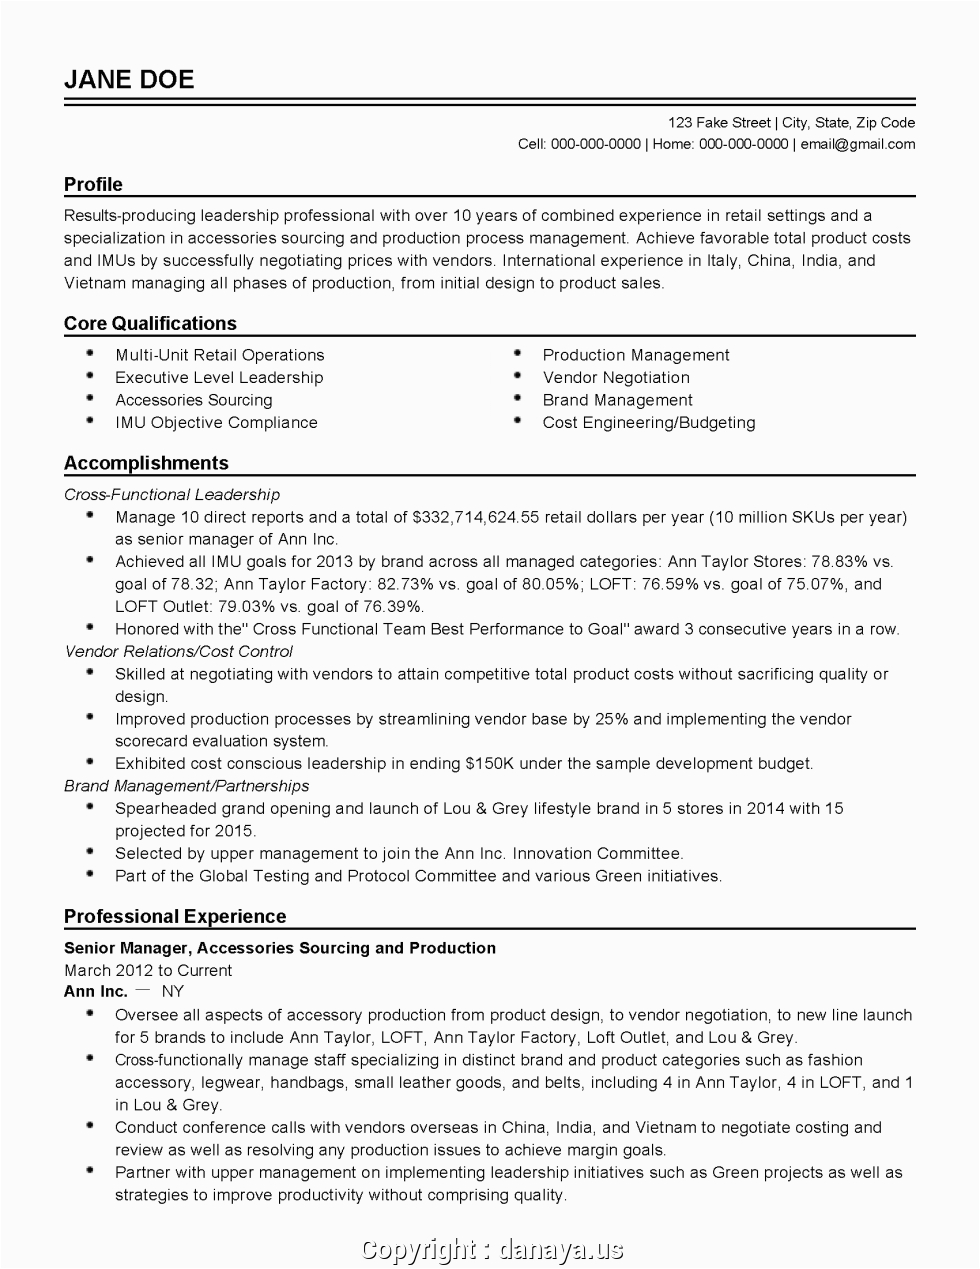 Sample Resume for Production Manager In India Make Sample Resume for Production Manager In India